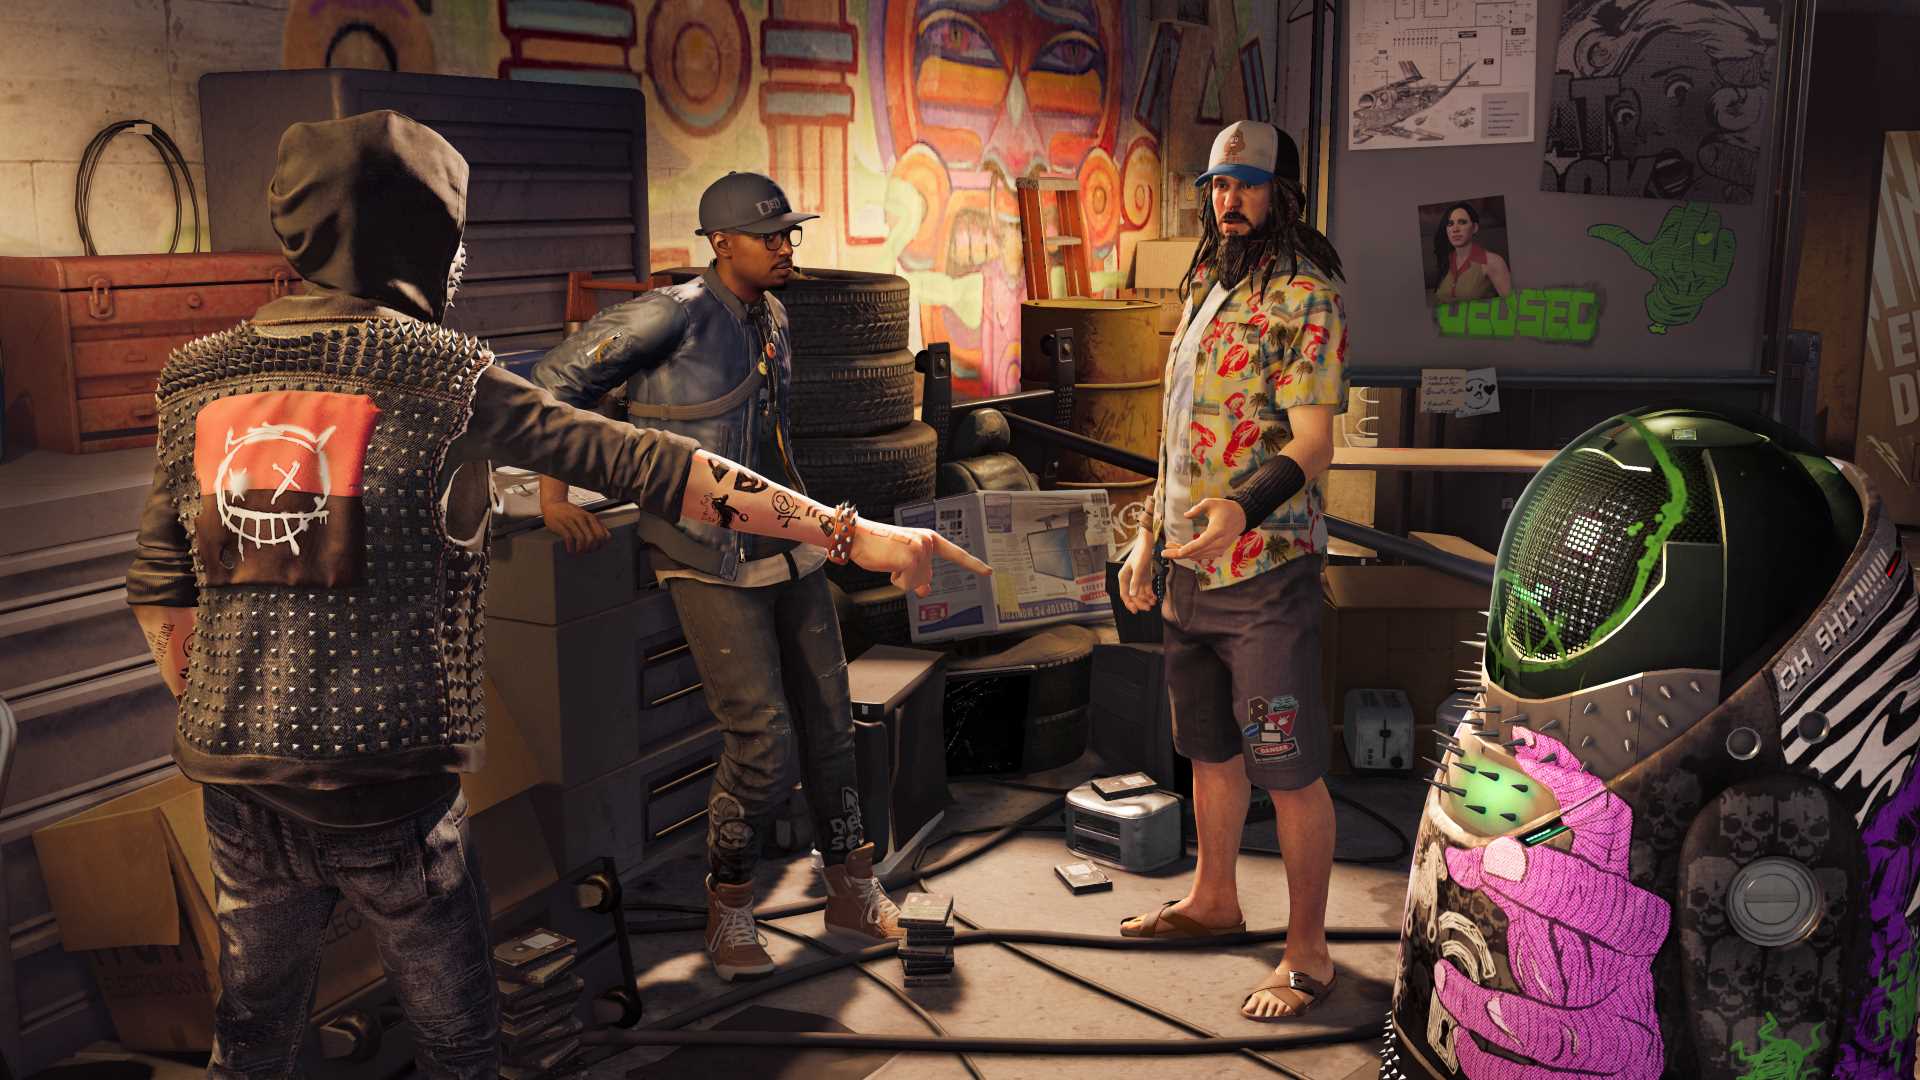 watch_dogs_2_wrench_jnr